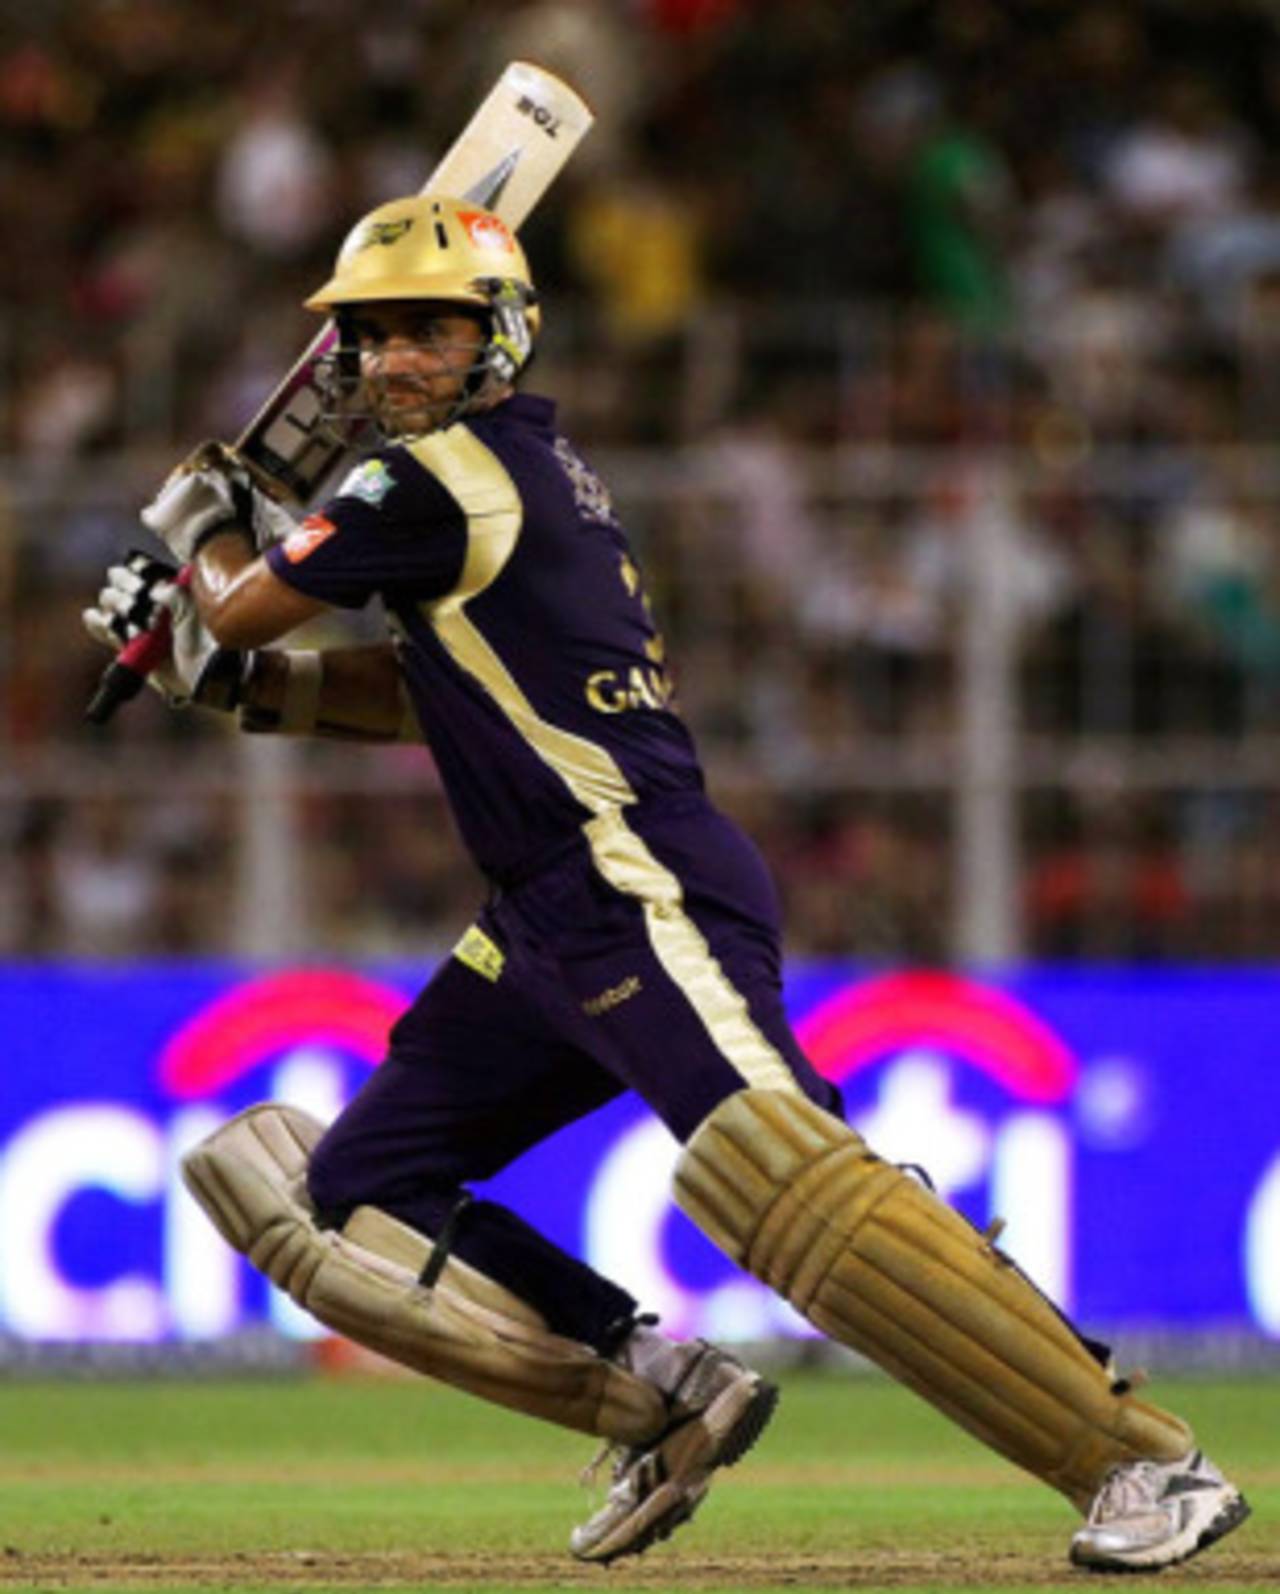 Sourav Ganguly cracks the ball through the off side, Kolkata Knight Riders v Deccan Chargers, IPL, Eden Gardens, April 1, 2010